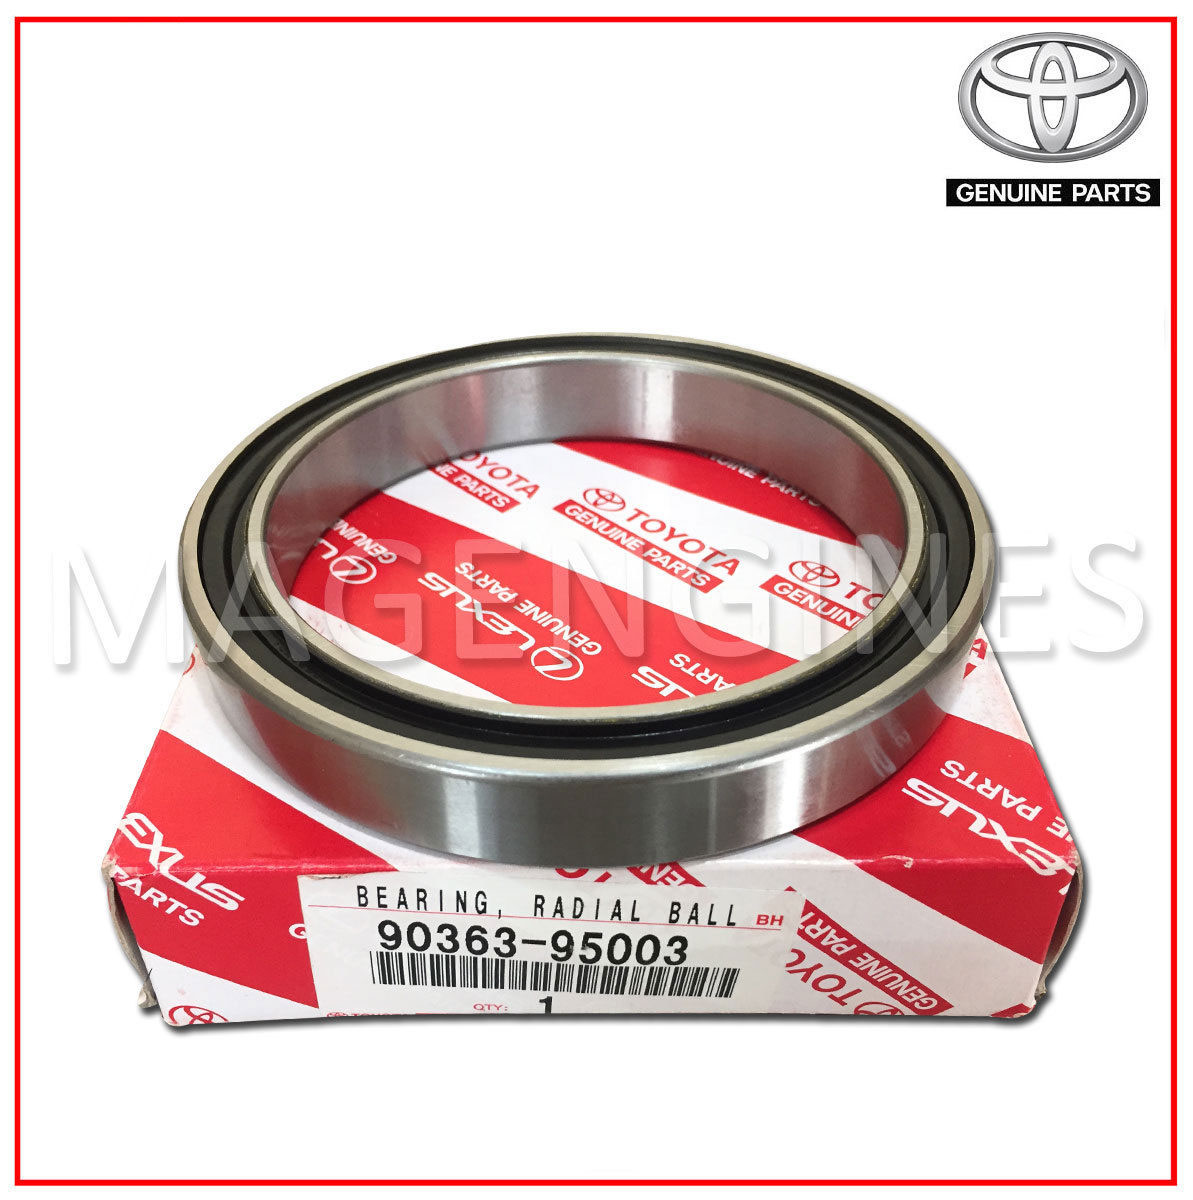 radial ball for transmission coupling 903639 no.1 90363-95003 Toyota Bearing 